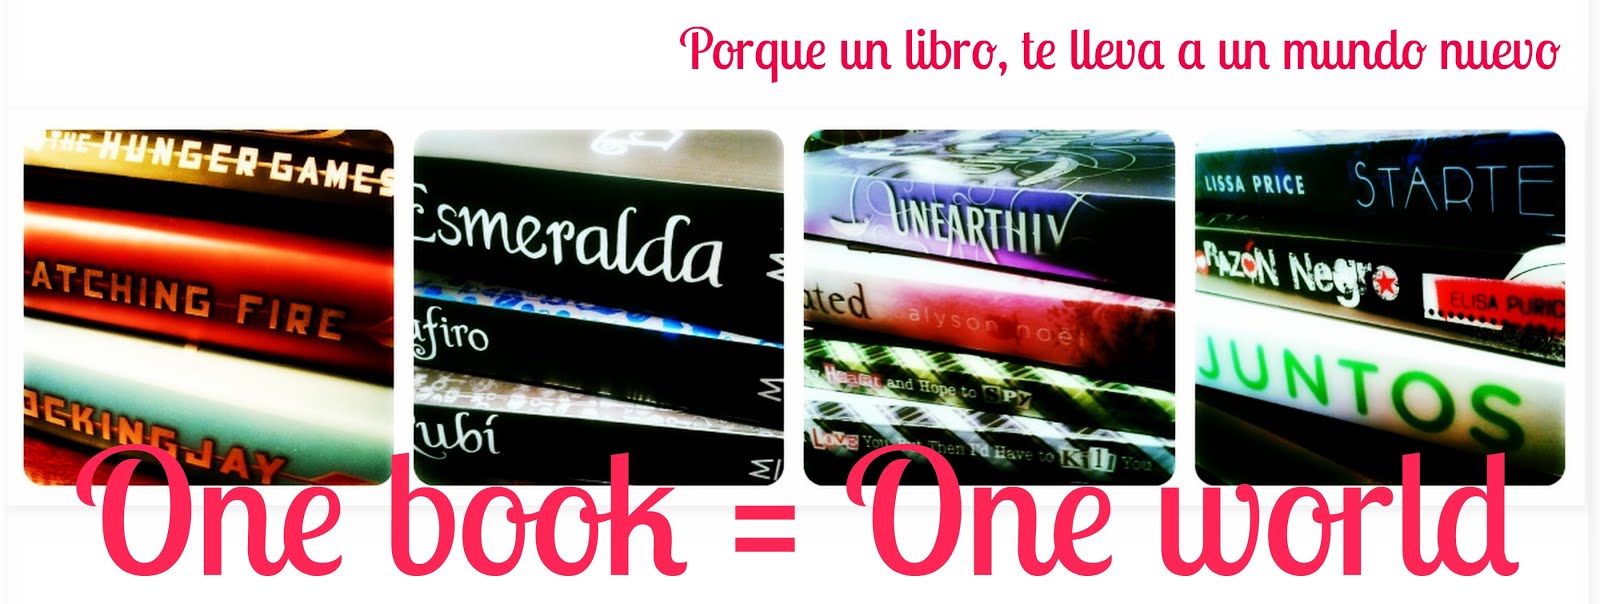 One book = One world